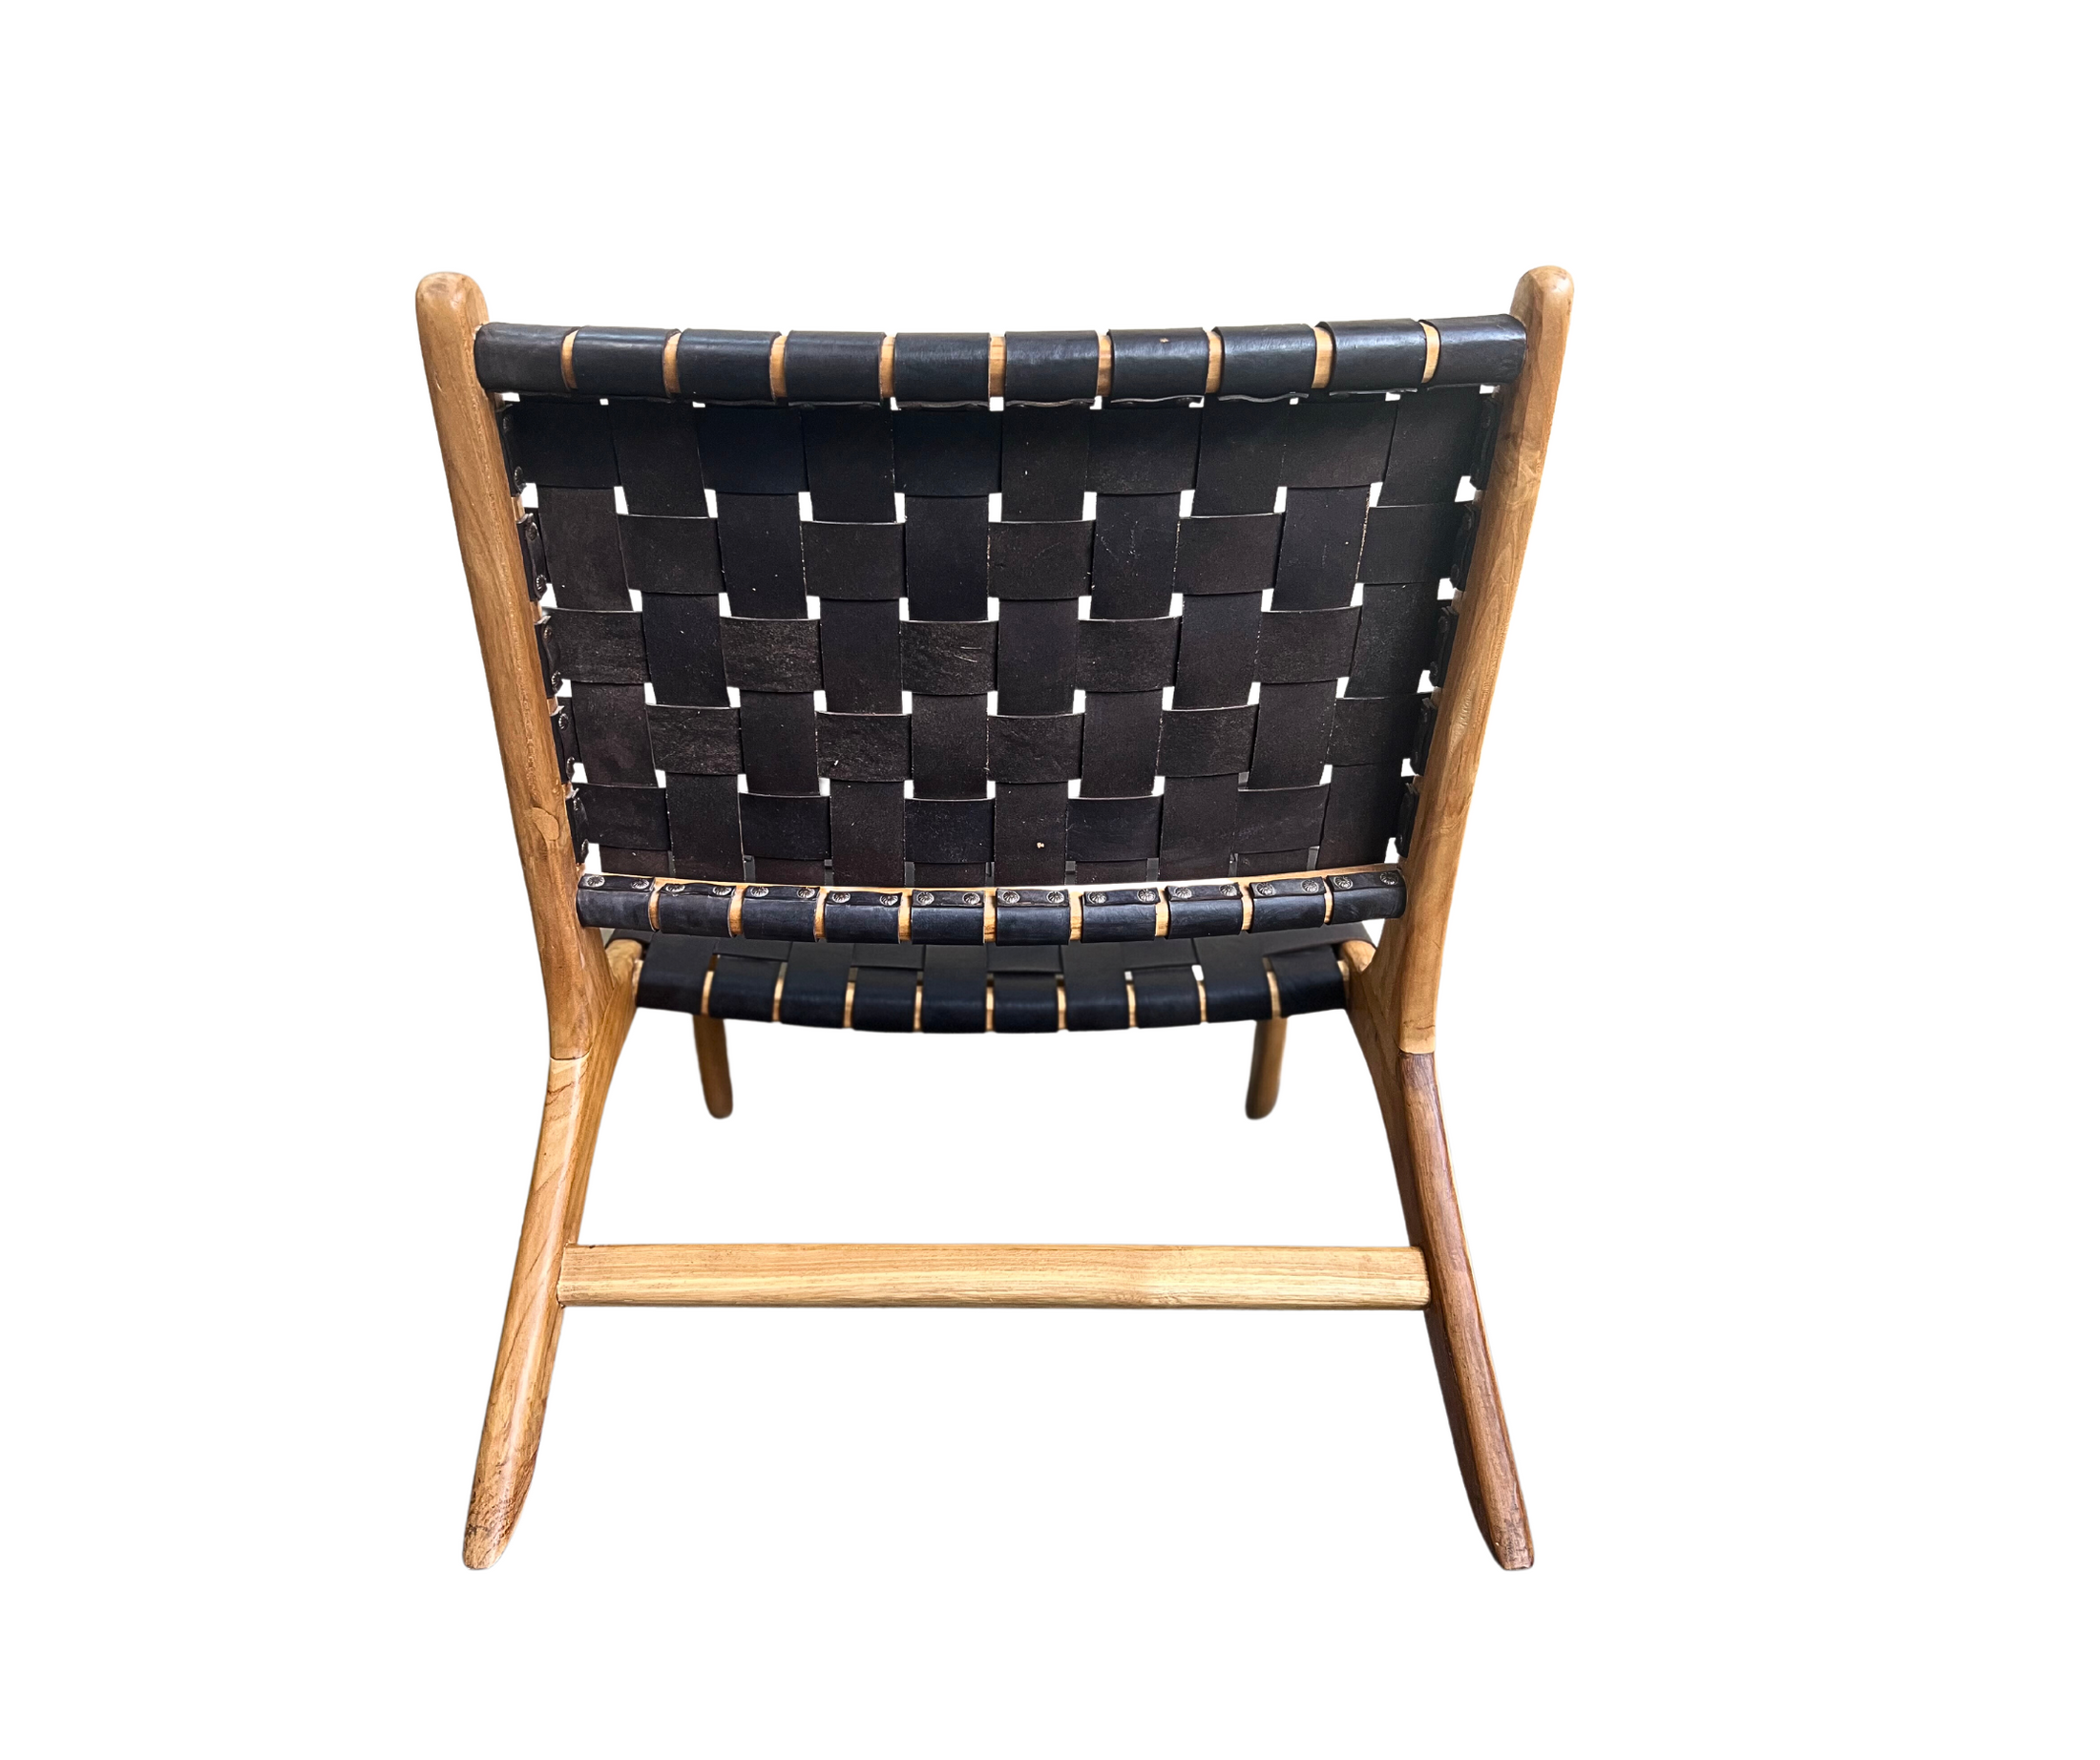 Leather Strap Wooden Chair | Black Leather